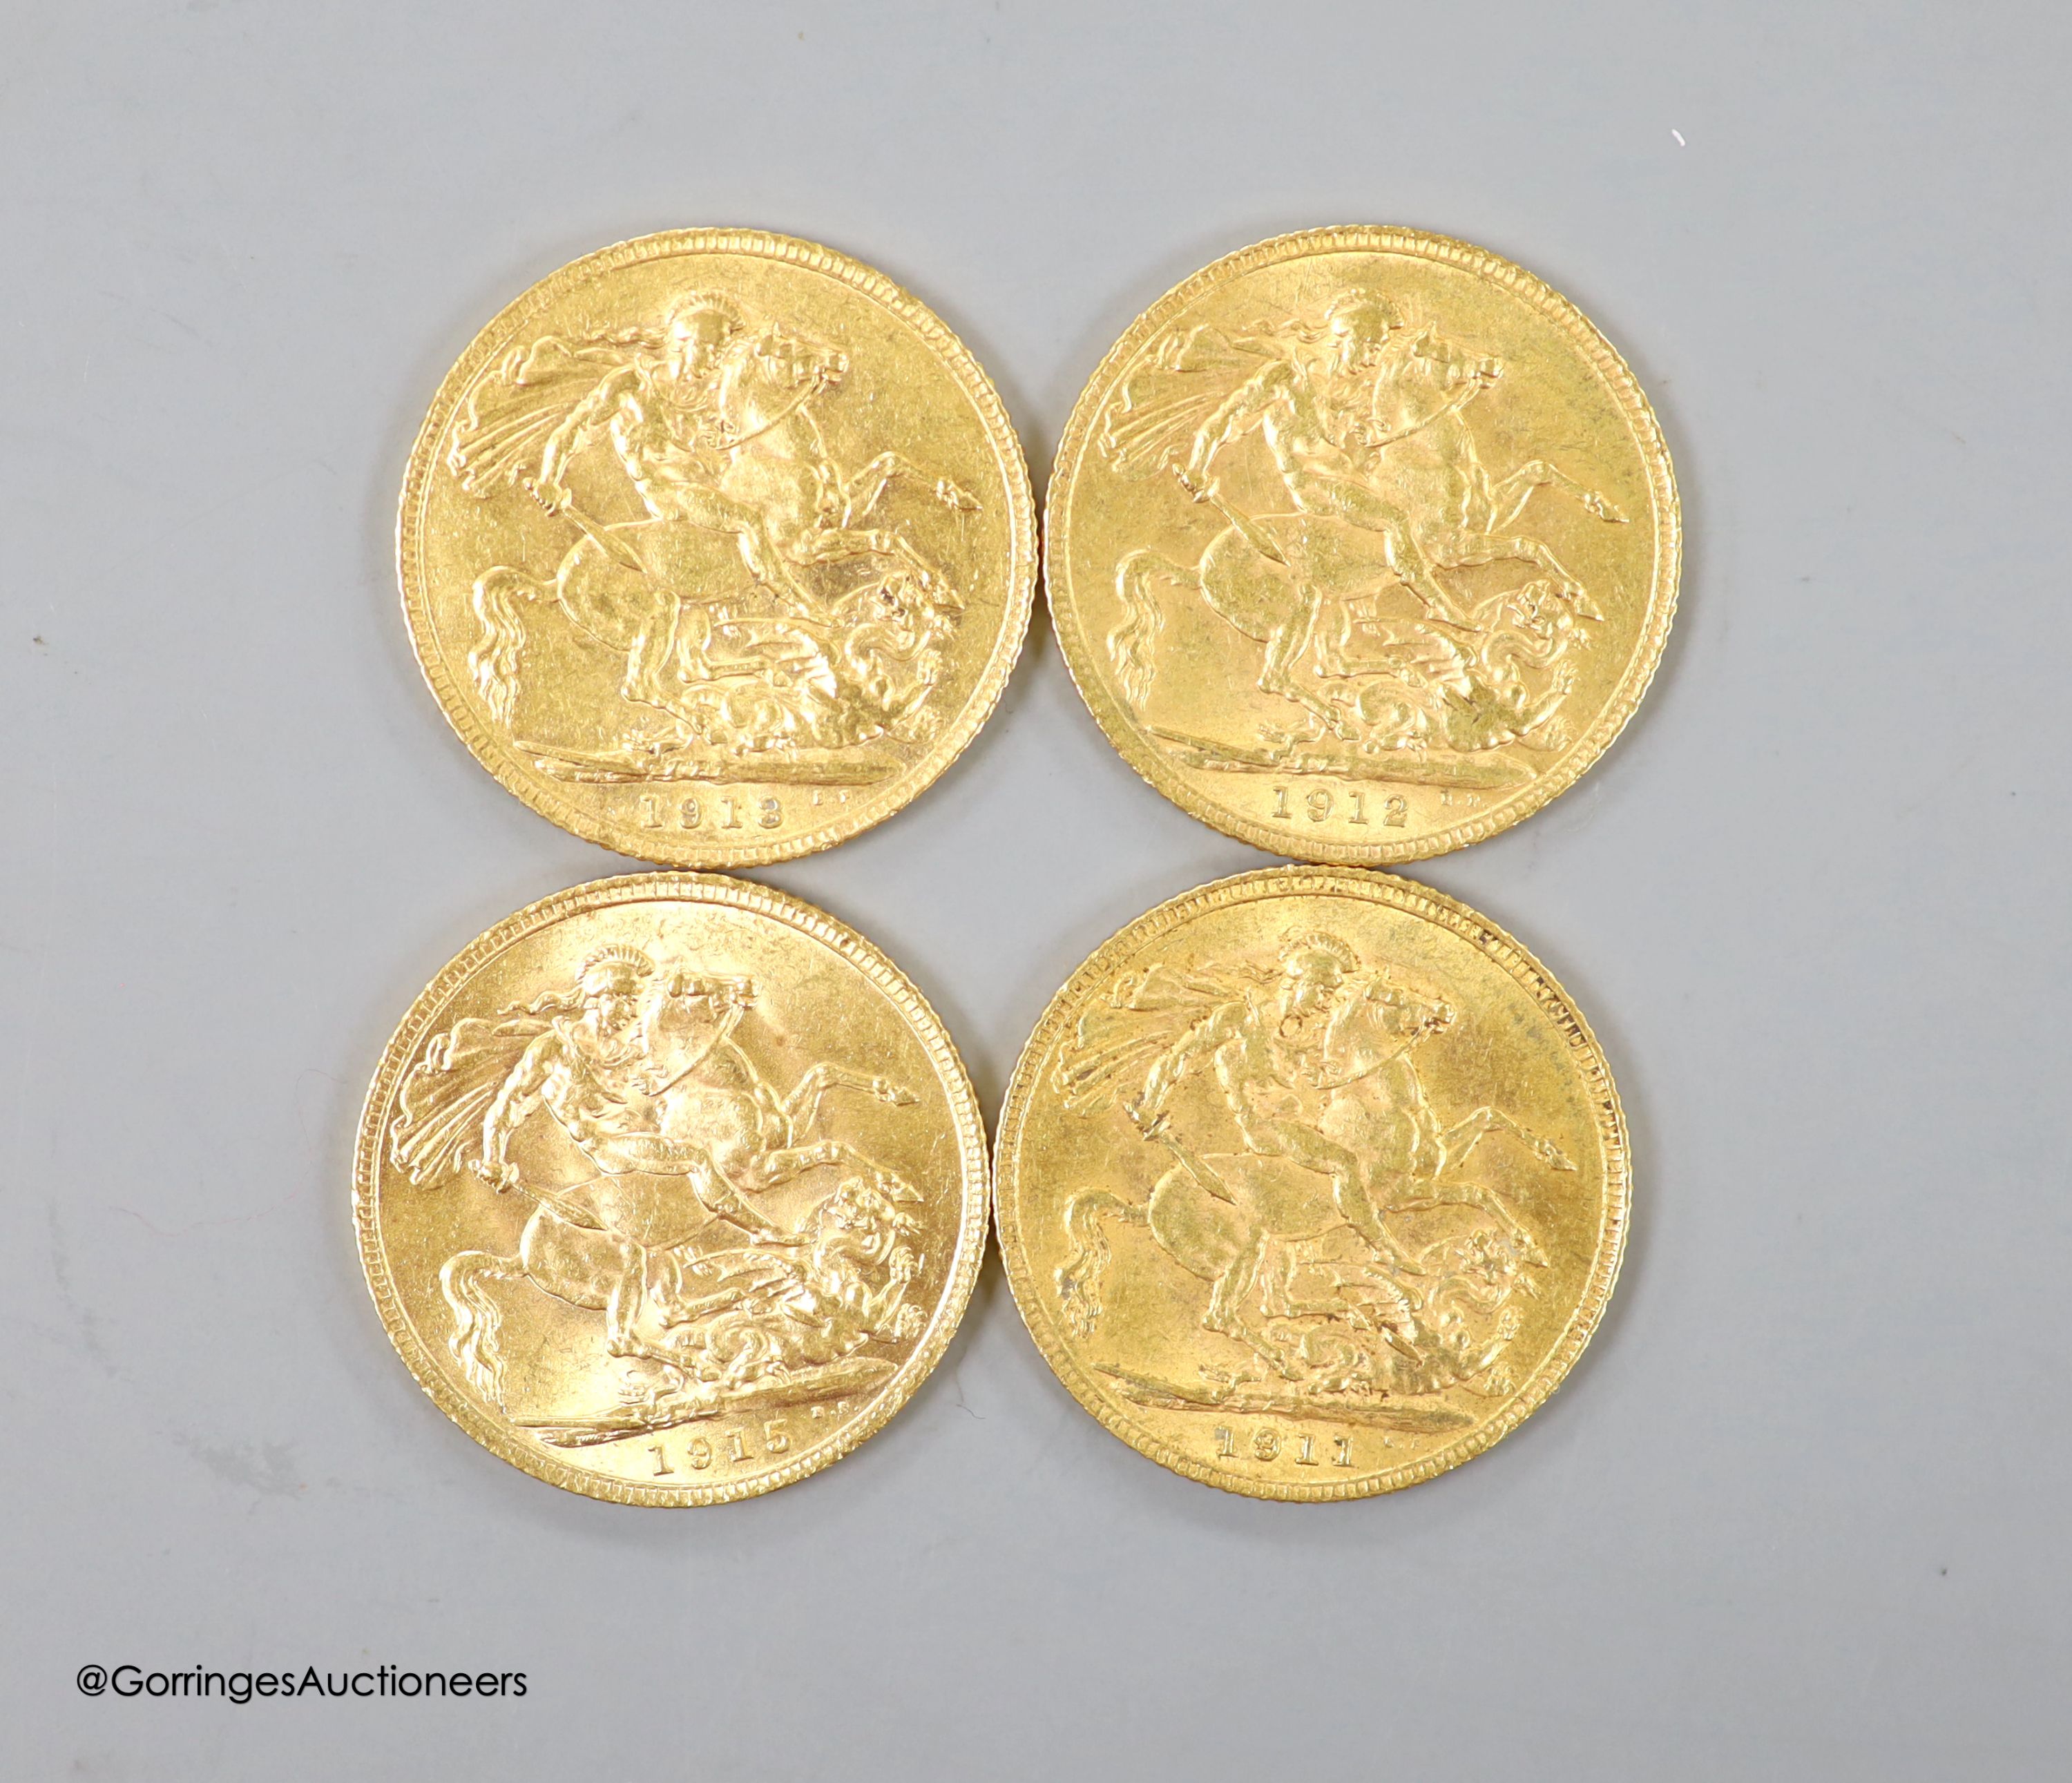 Four George V gold sovereigns, 1911, 1912, 1913 and 1915